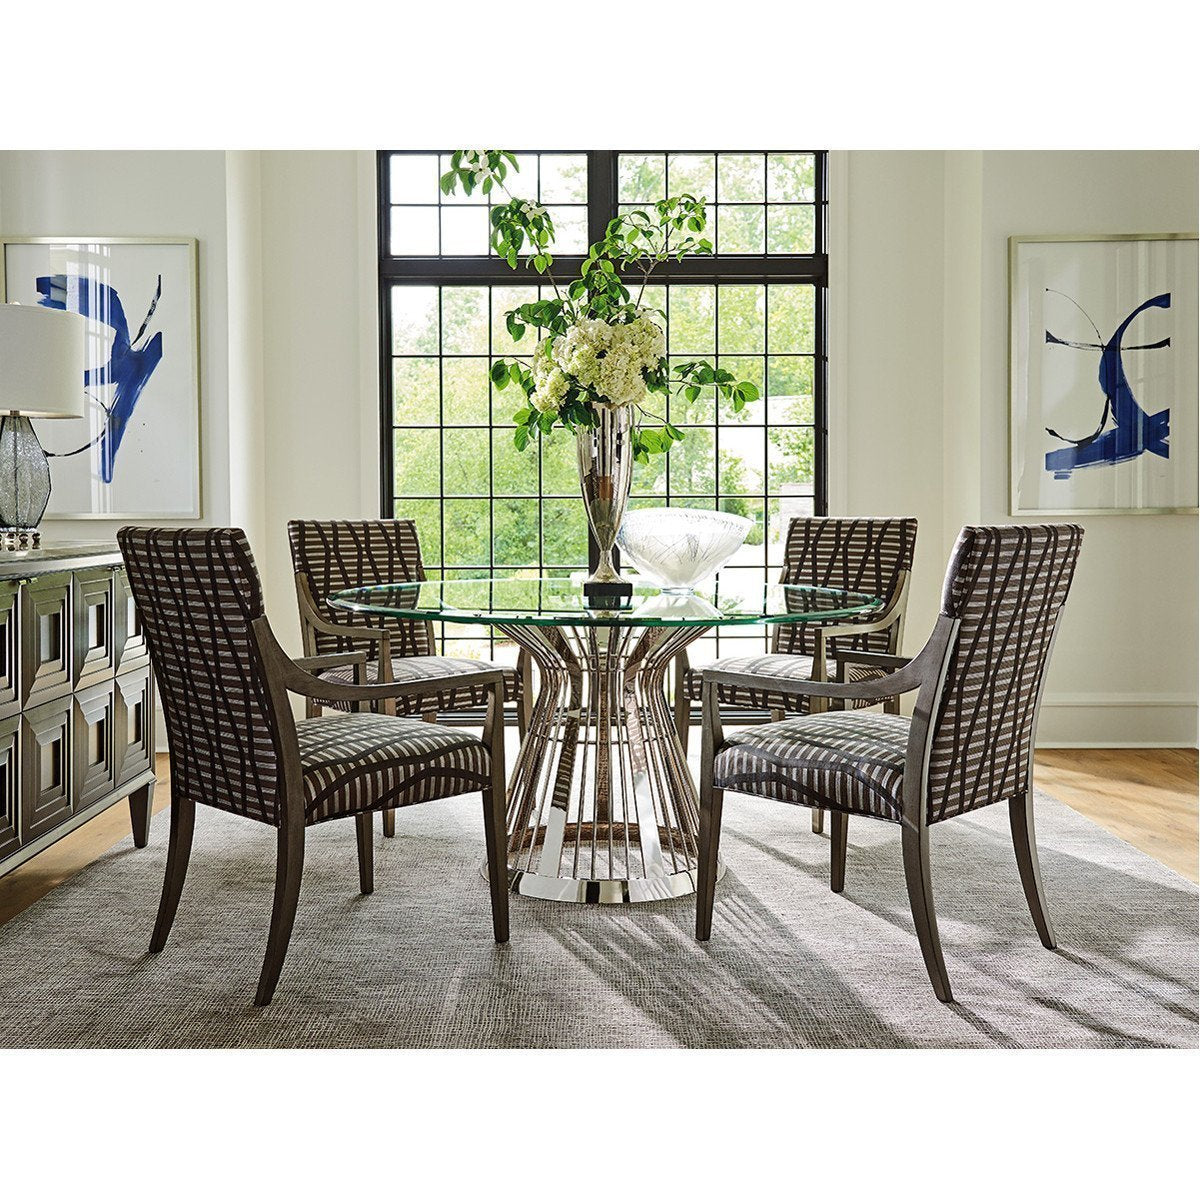 Lexington Ariana Riviera Stainless Dining Table